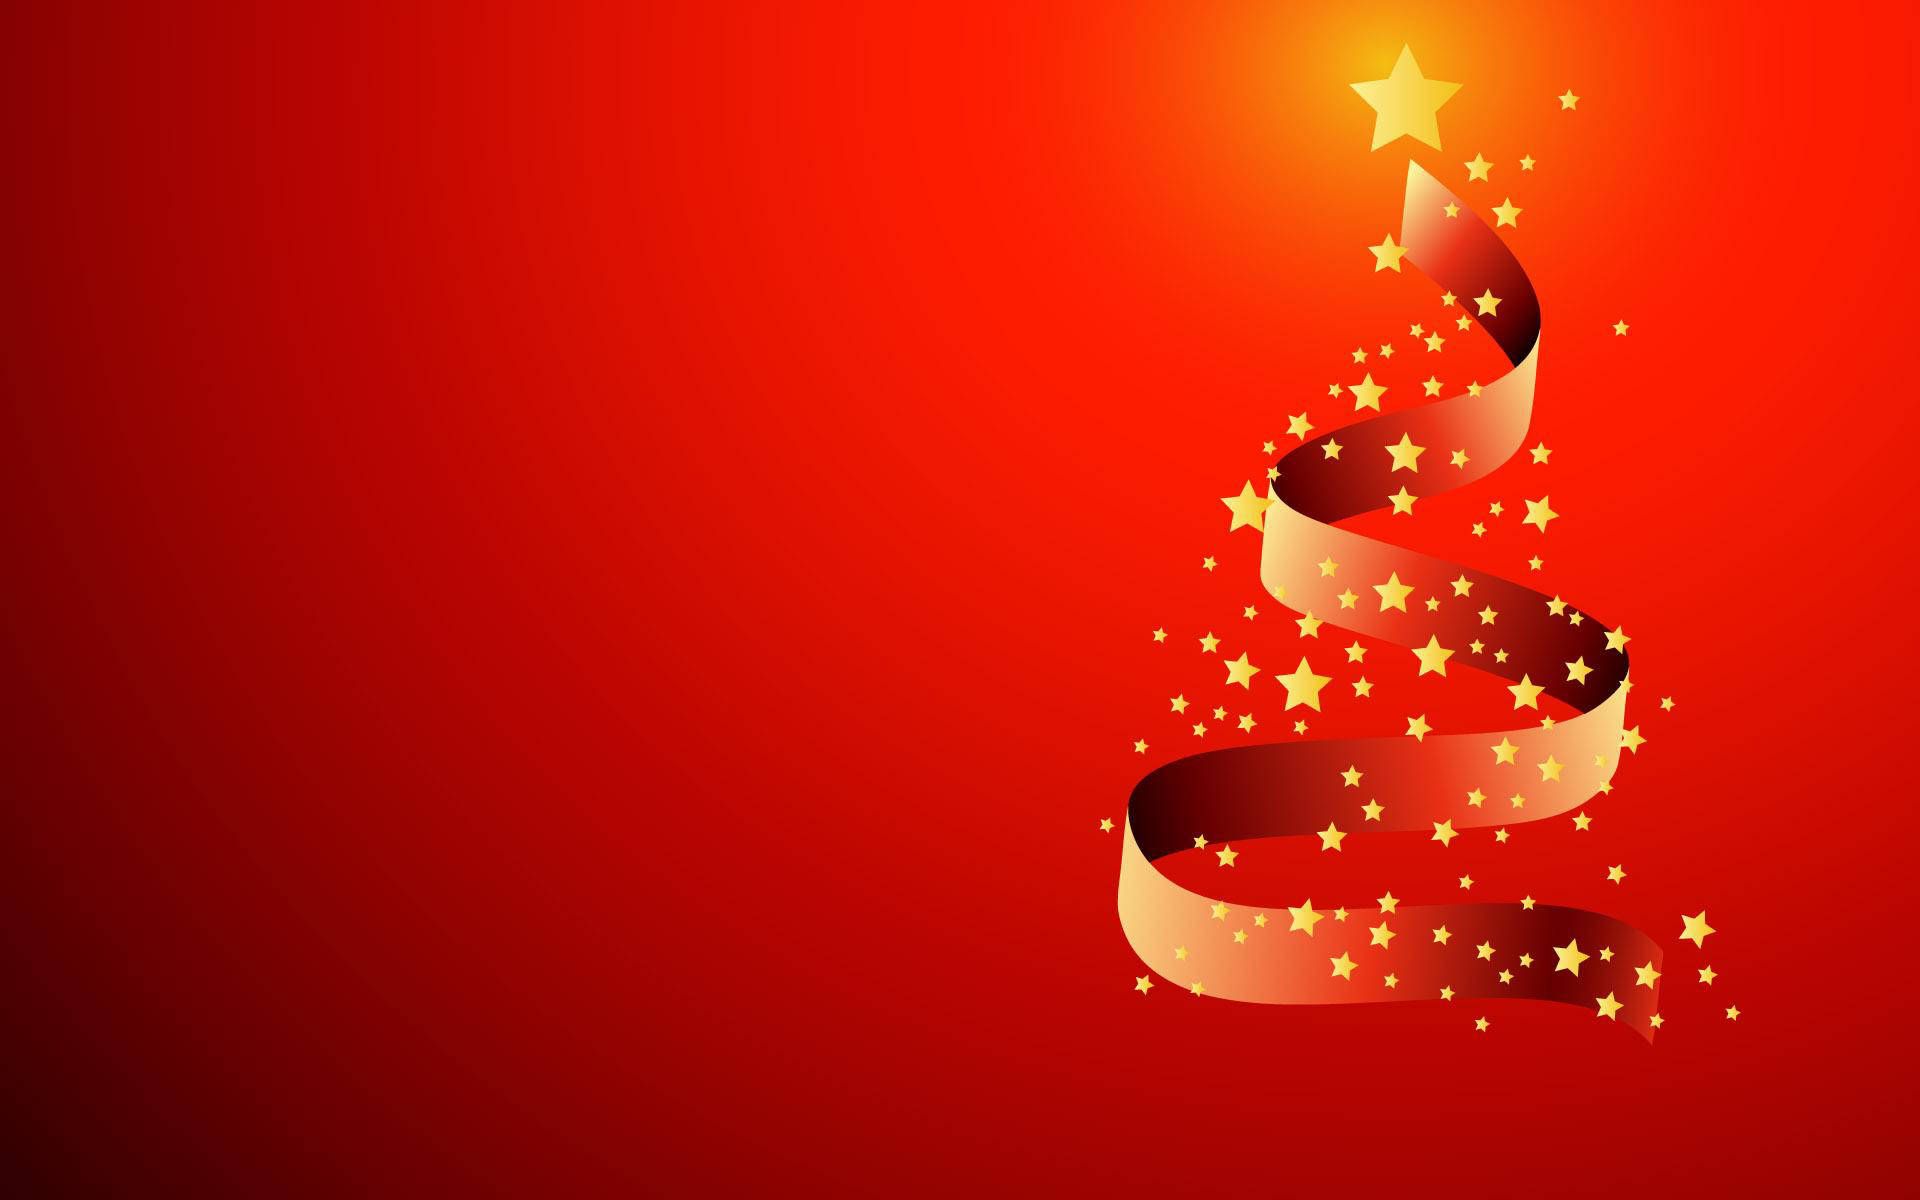 Christmas Wallpaper Backgrounds - HD Wallpapers Backgrounds of